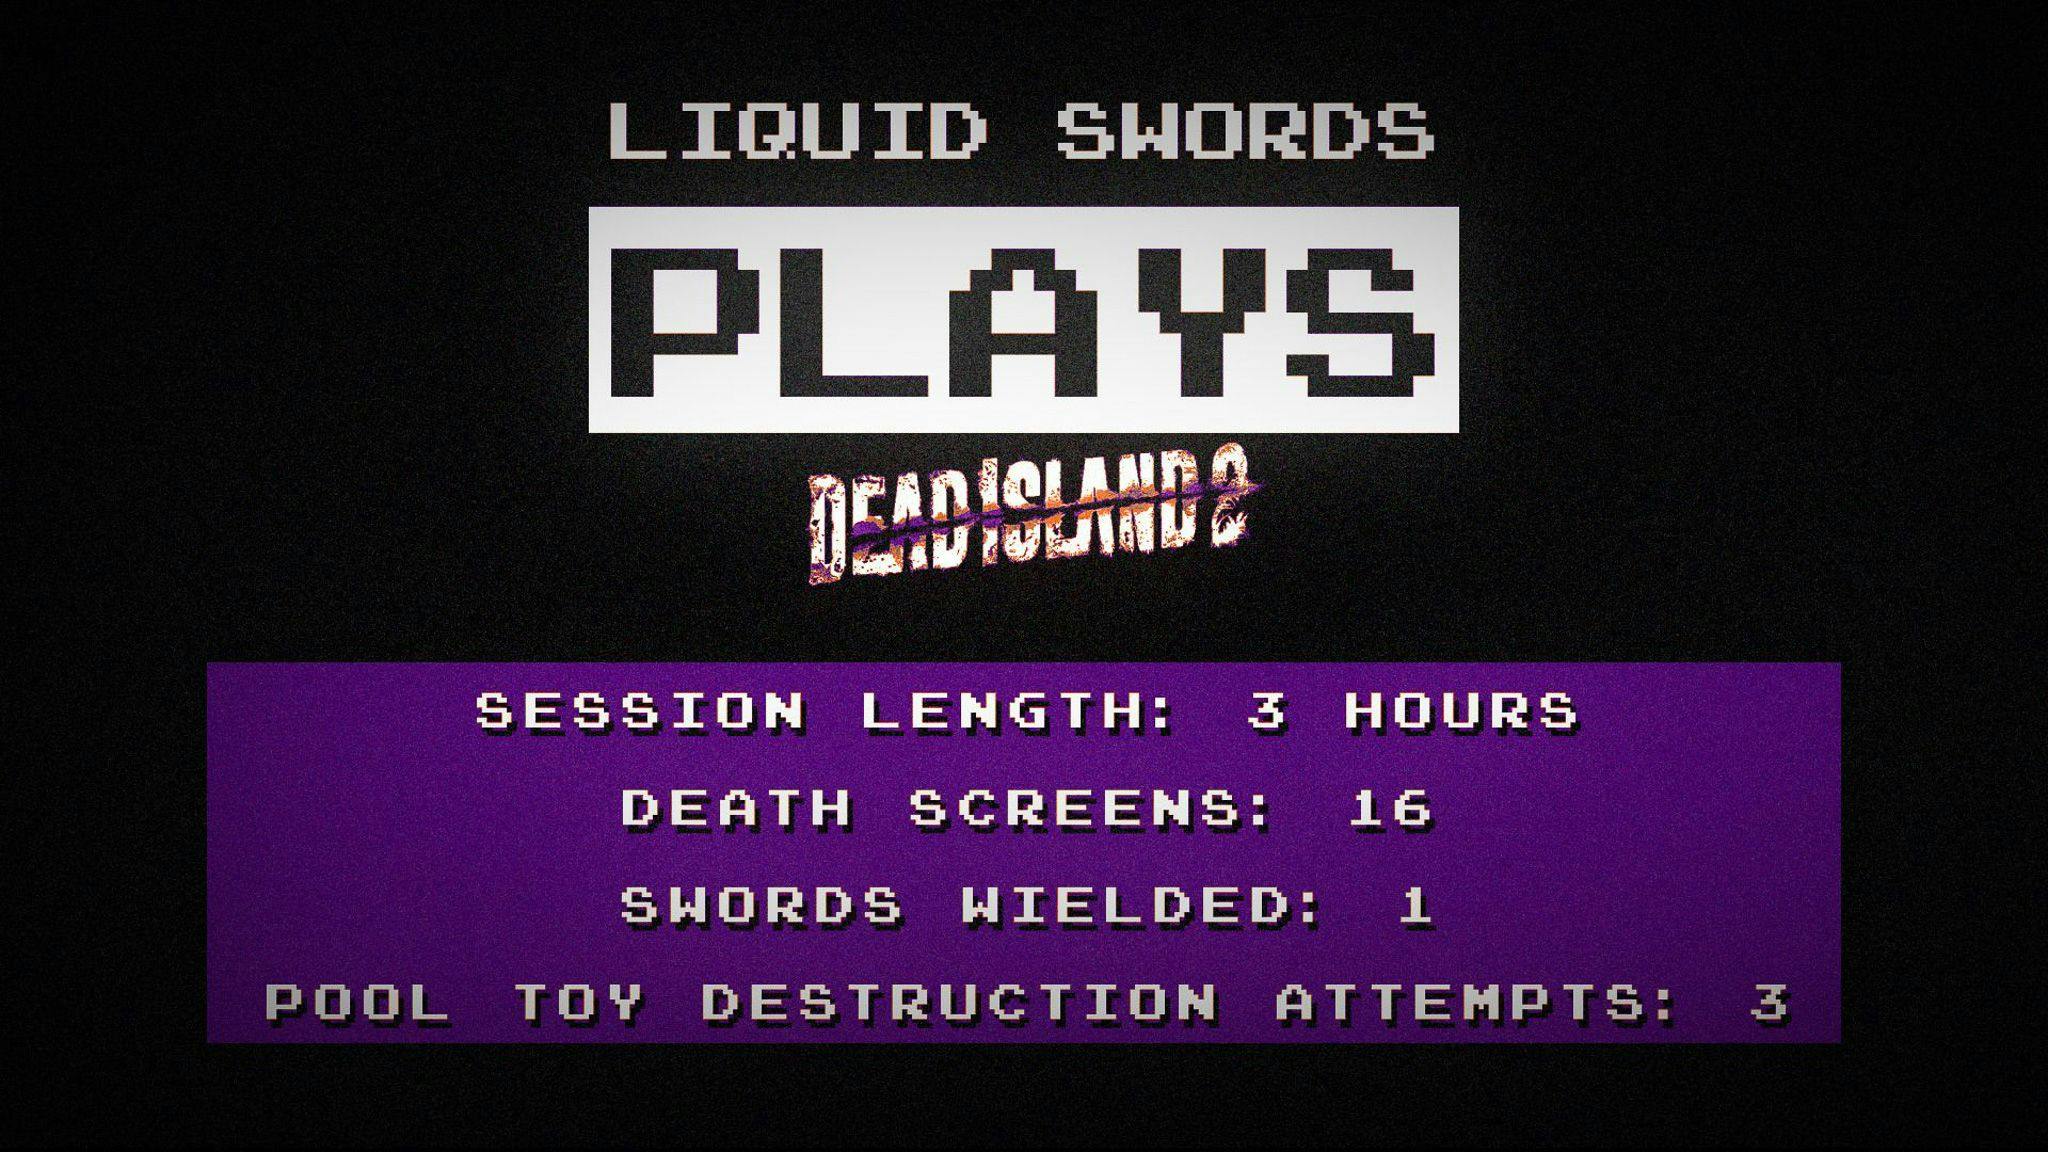 Liquid Swords Plays Dead Island 2. Session length: 3 hours. Death screens: 16. Swords wielded: 1. Pool toy destruction attempts: 3.